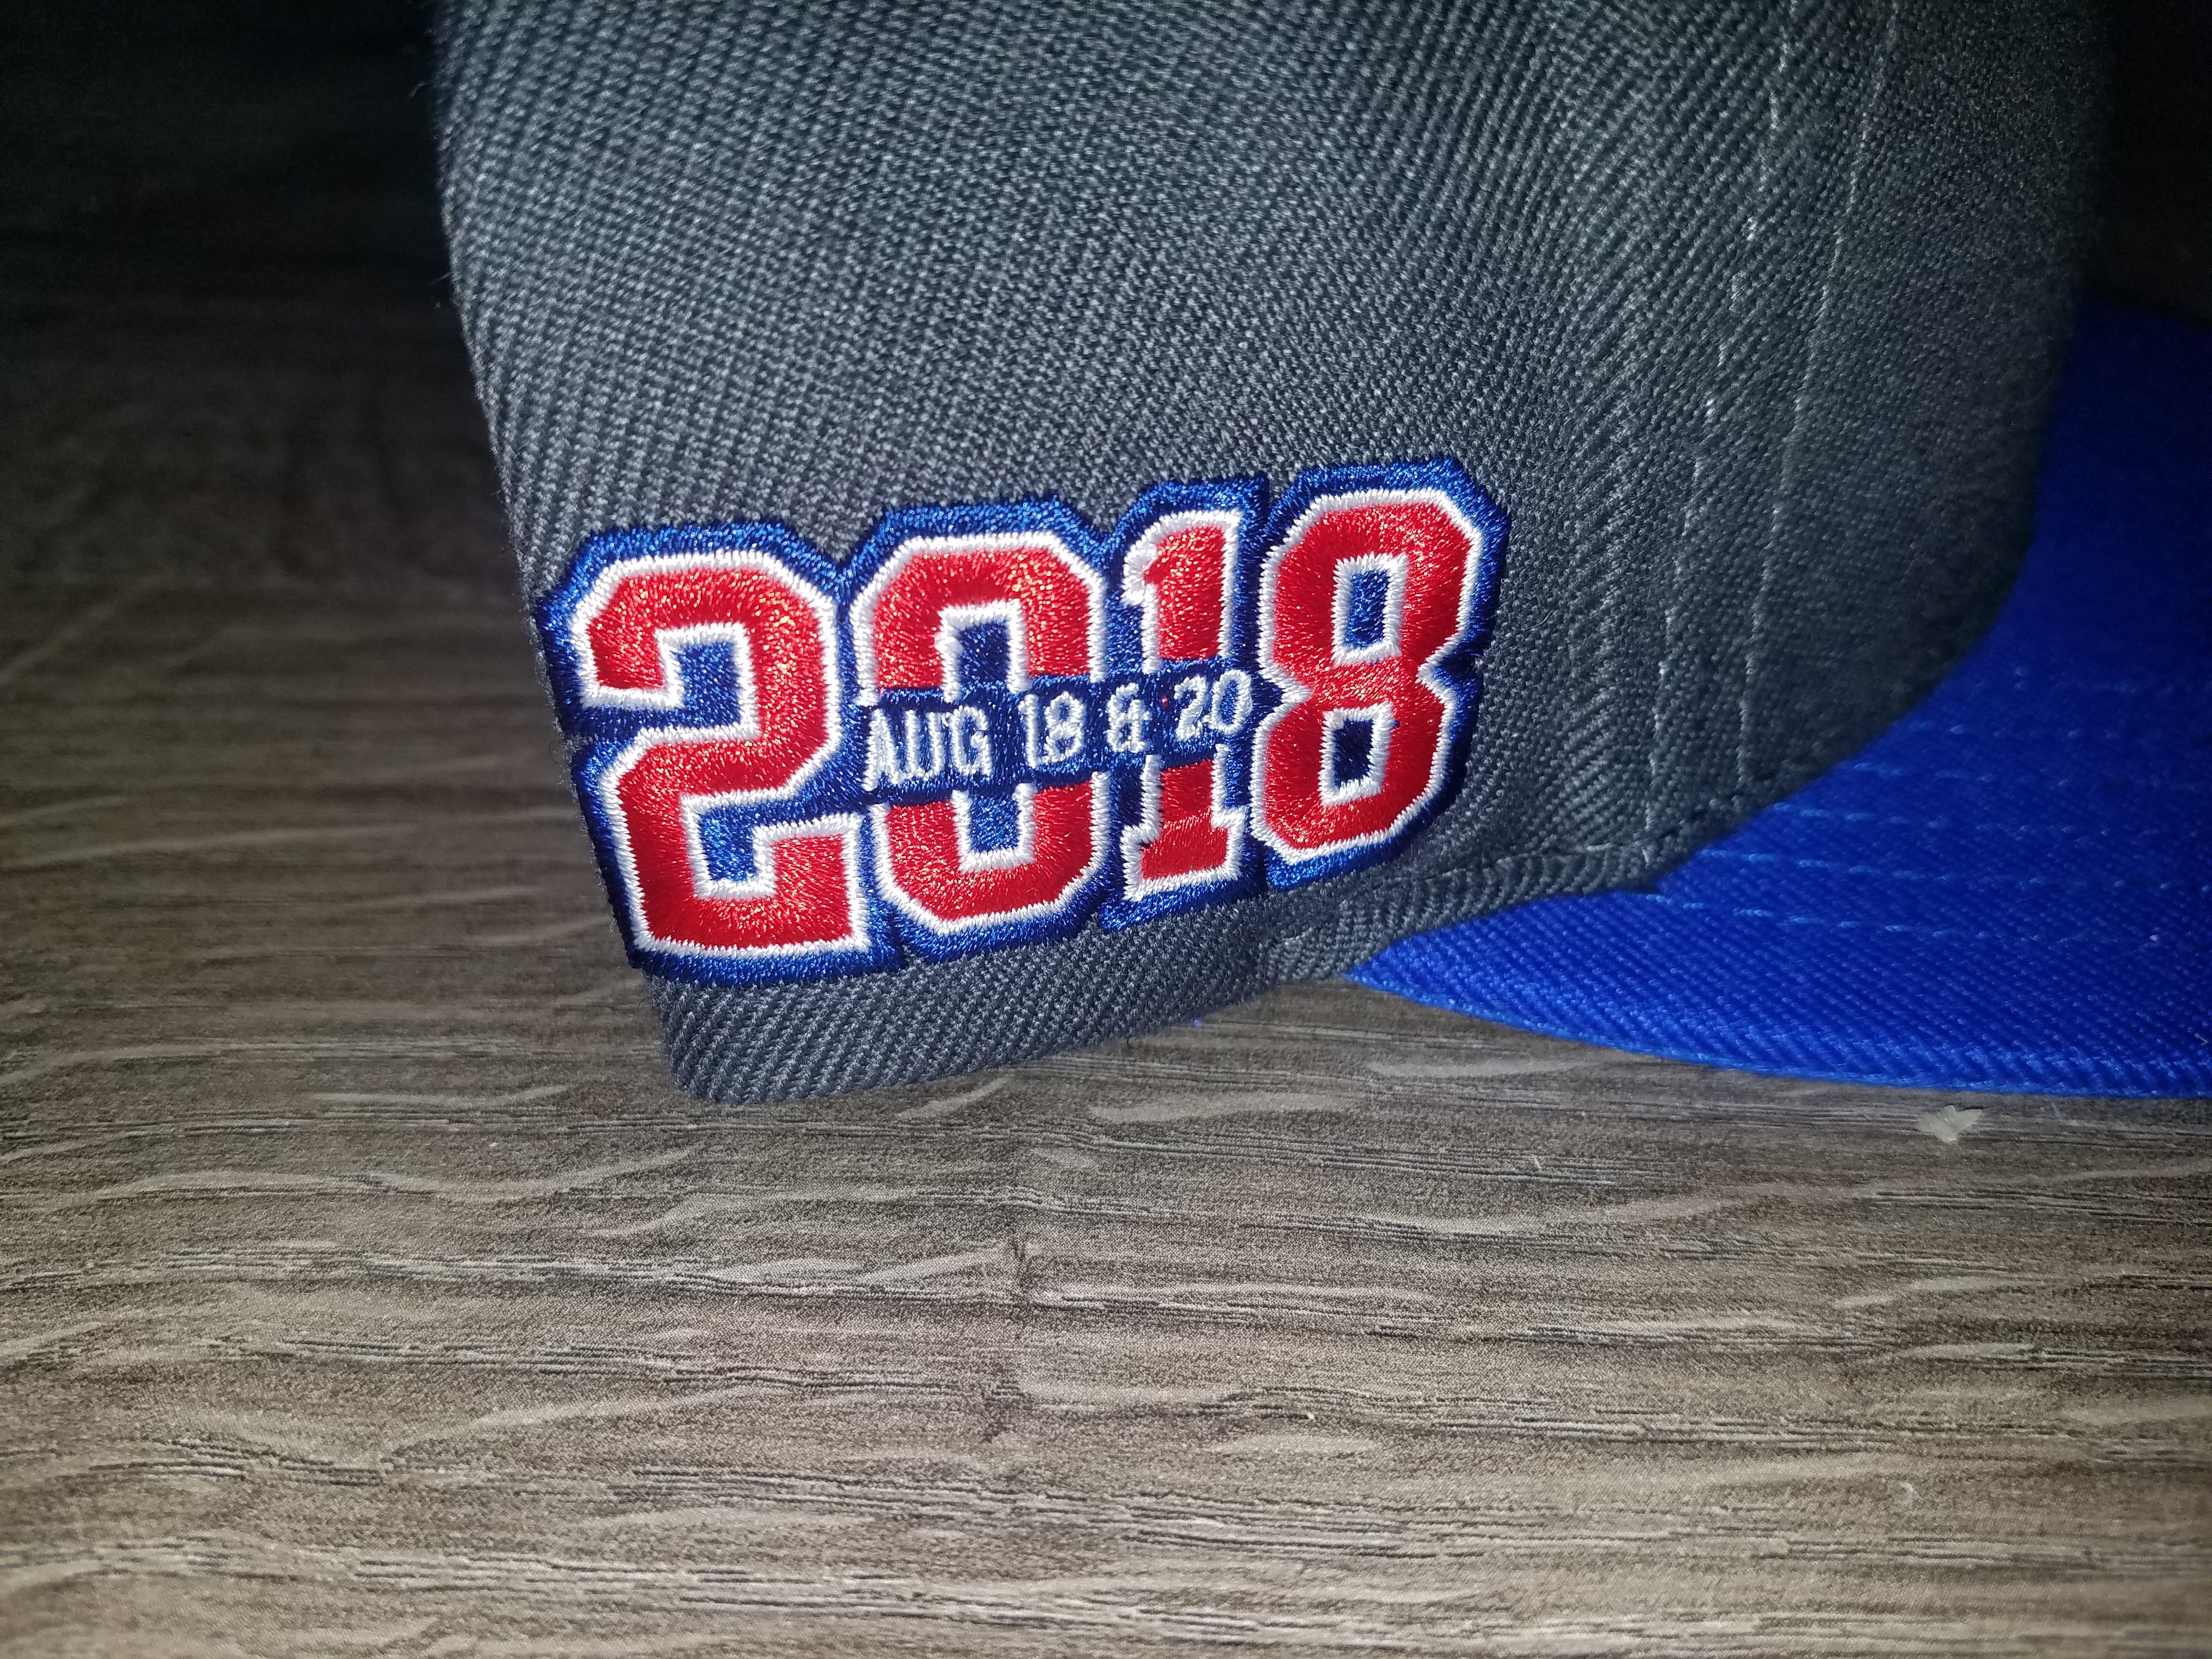 Notes:  Purchased from the Pearl Jam Merch Tent outside of Wrigley field on August 16, 2018.  Never worn.  Ready to ship!